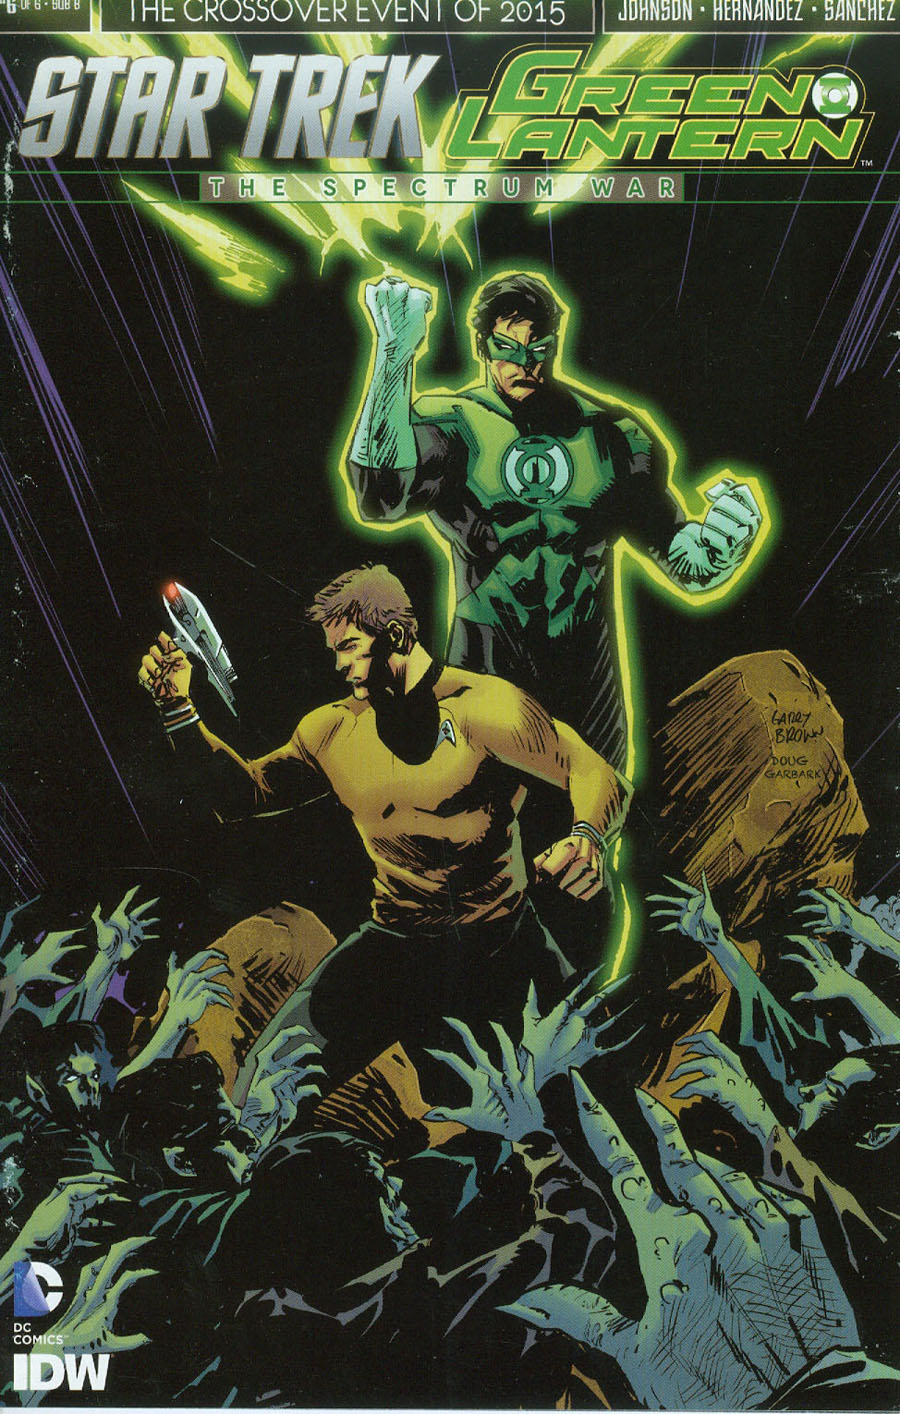 Star Trek Green Lantern #6 Cover C Variant Garry Brown Connecting Subscription Cover